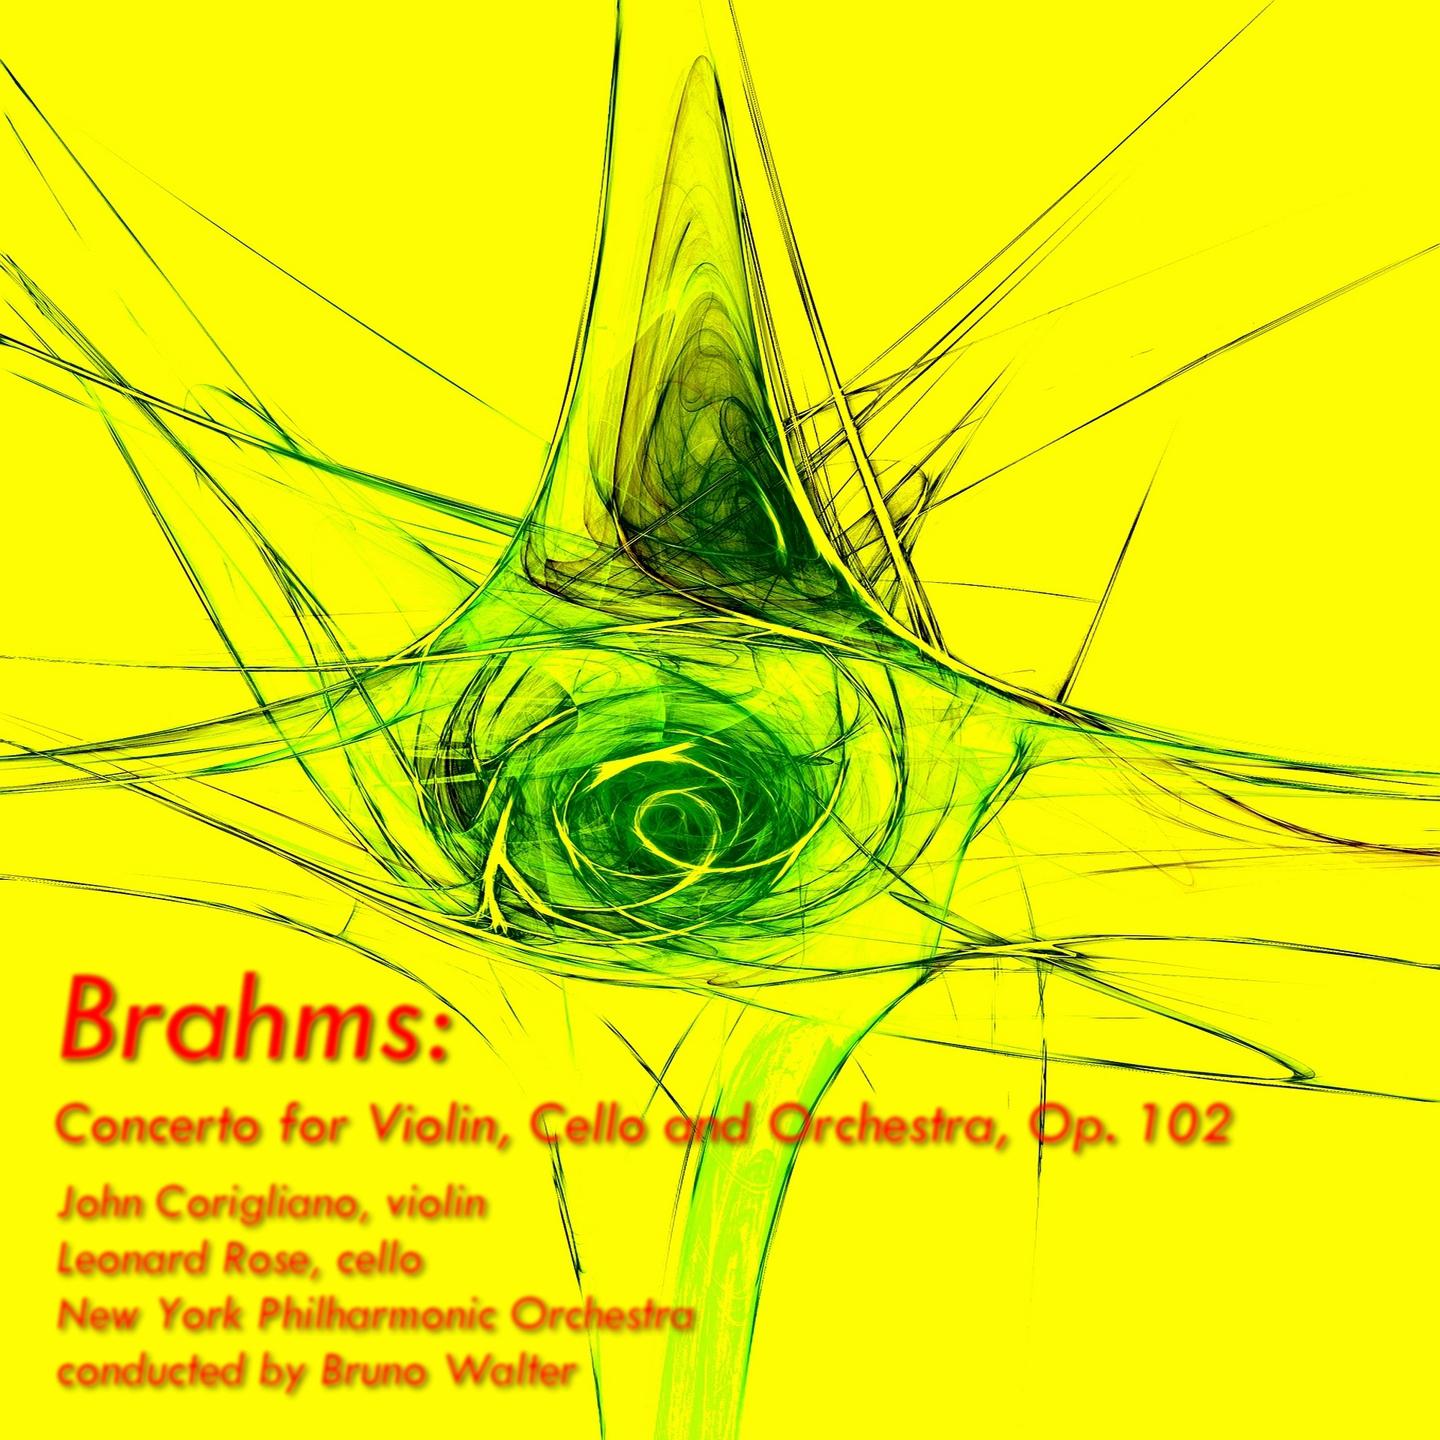 Brahms: Concerto for Violin, Cello and Orchestra, Op.102